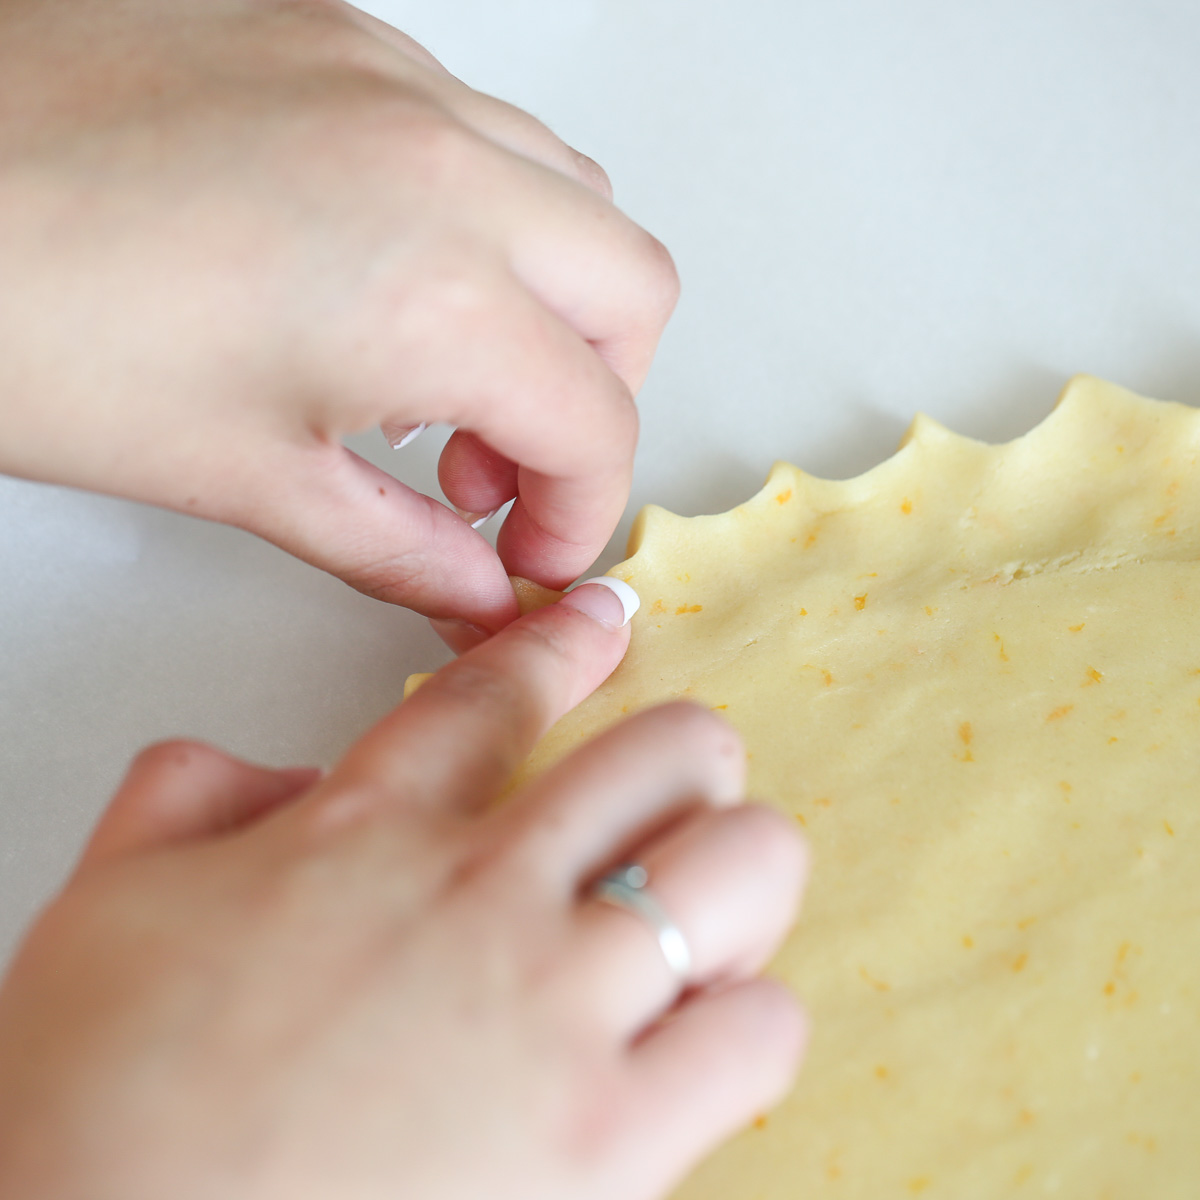 crimping the edge of fruit pizza cookie dough